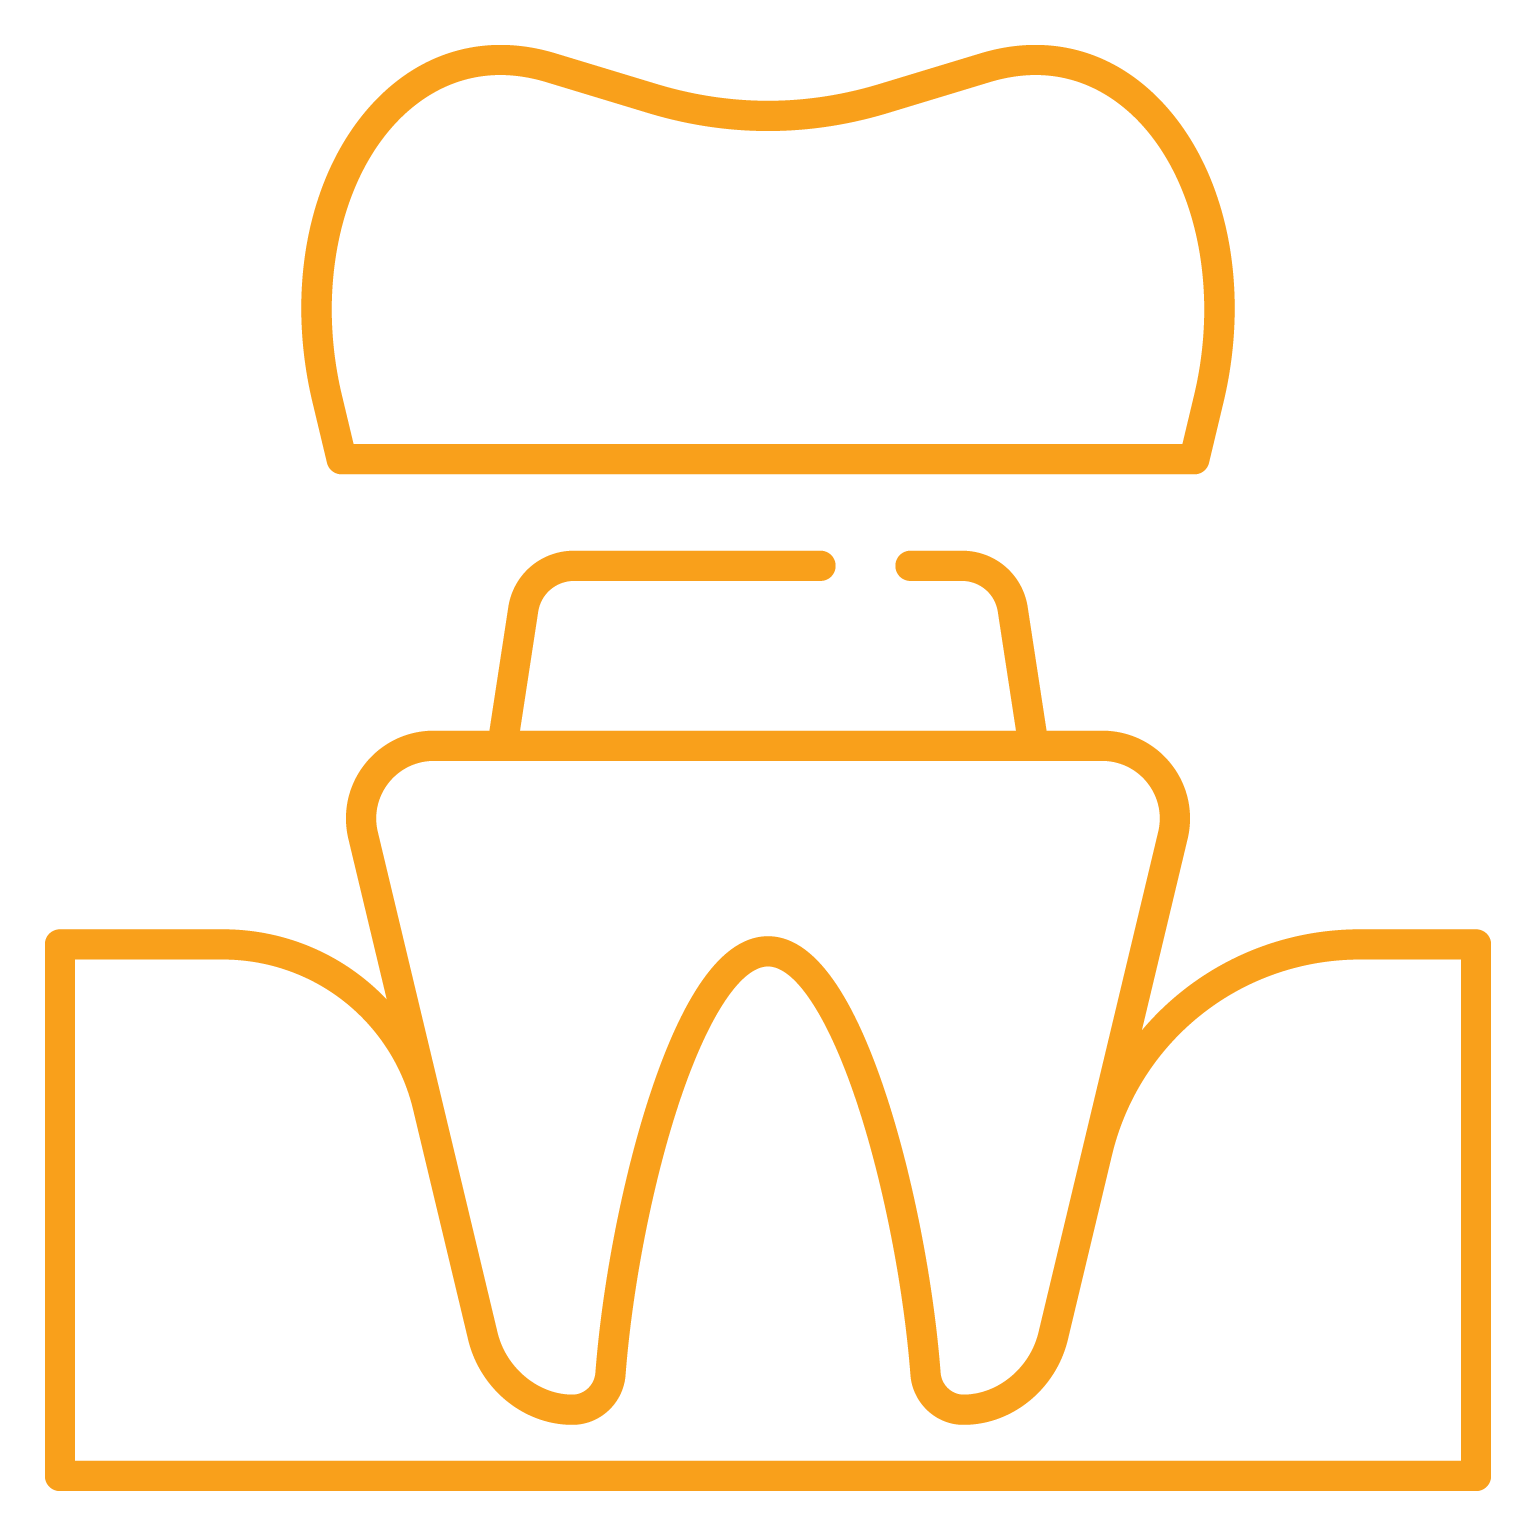 Graphic icon of a dental crown, representing restorative dental services offered by Dr. Kevin Burgdorf.